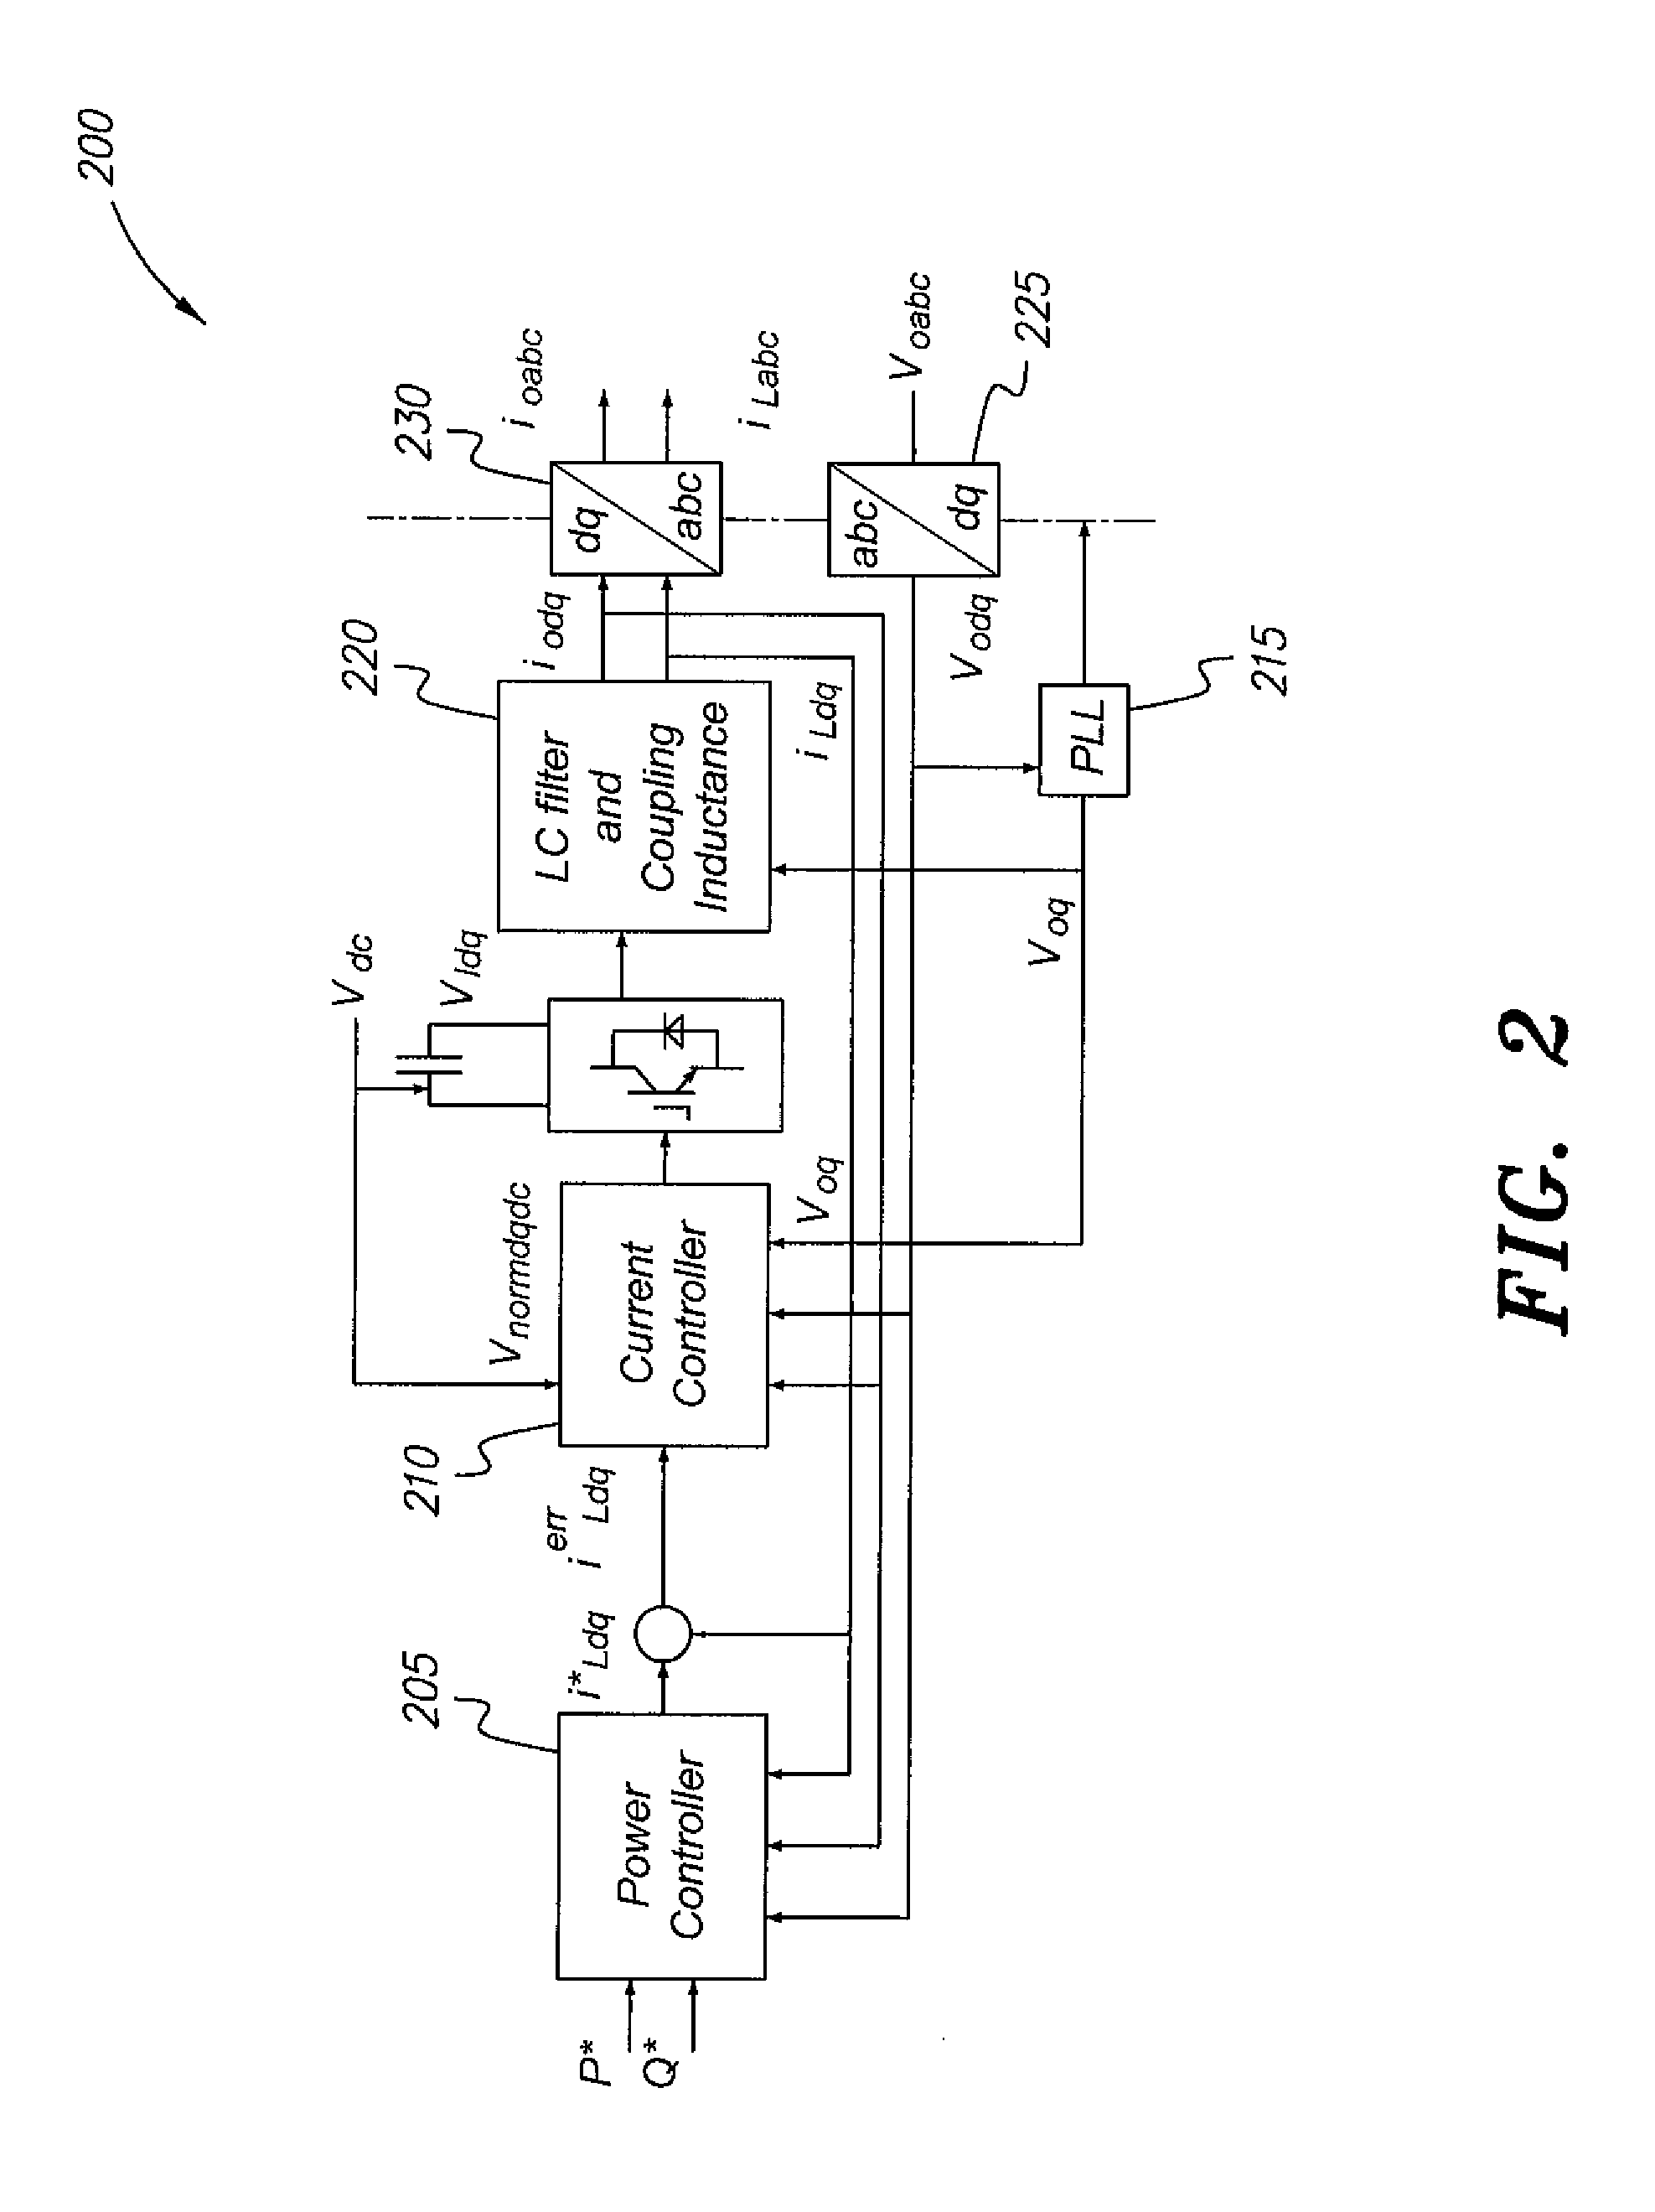 Particle swarm optimization system and method for microgrids